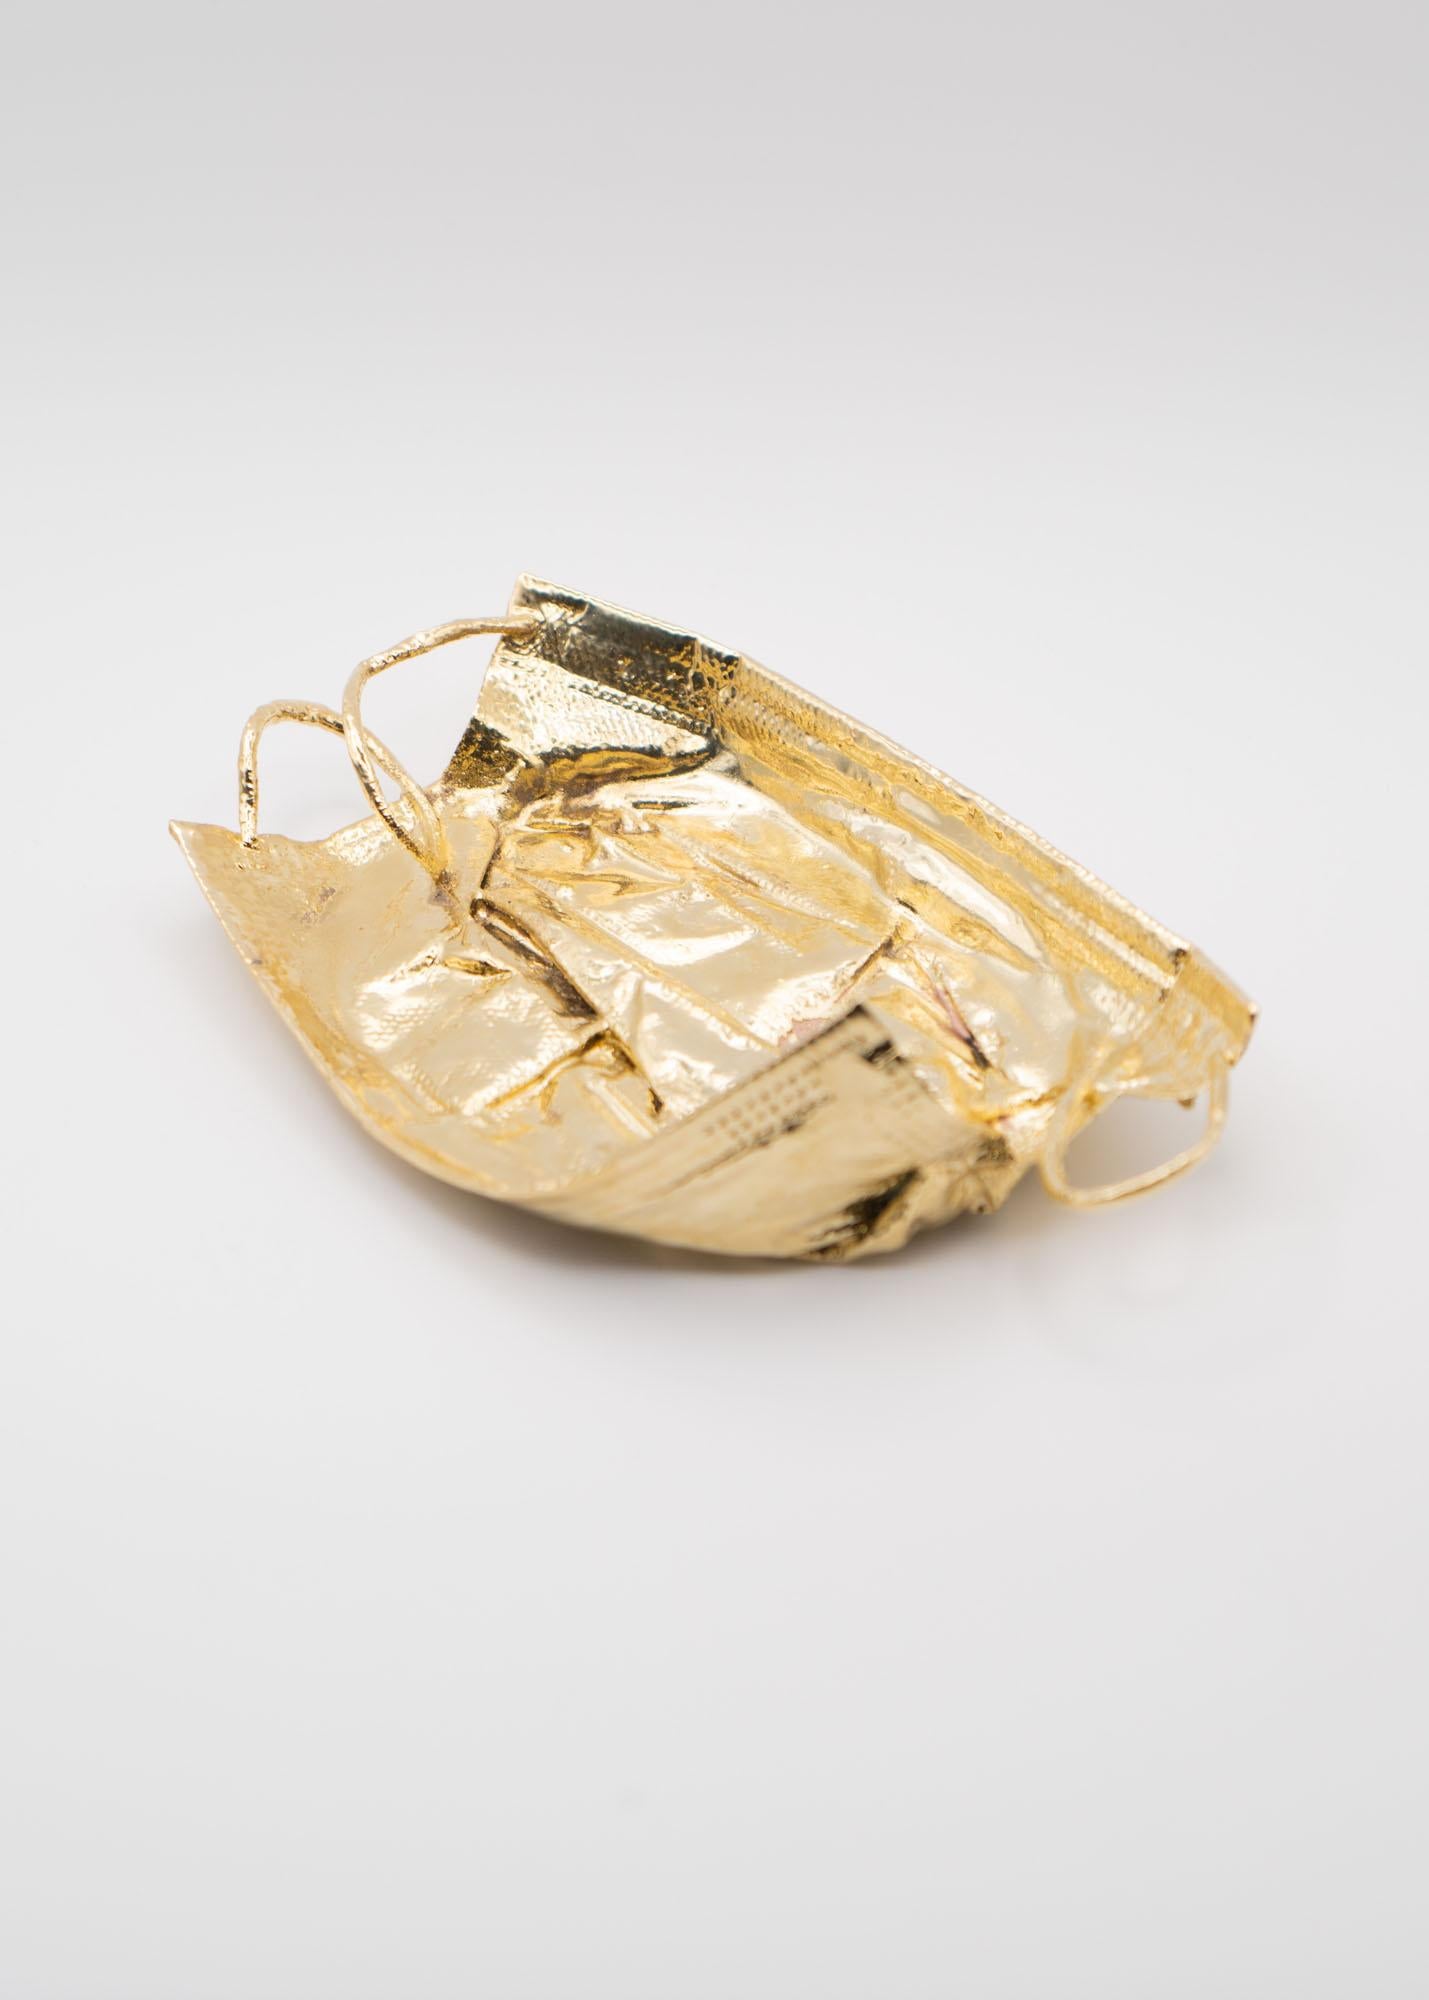 Remask Act 023 Gold Art Object Made from Surgical Mask by Enrico Girotti In New Condition For Sale In Verona, IT